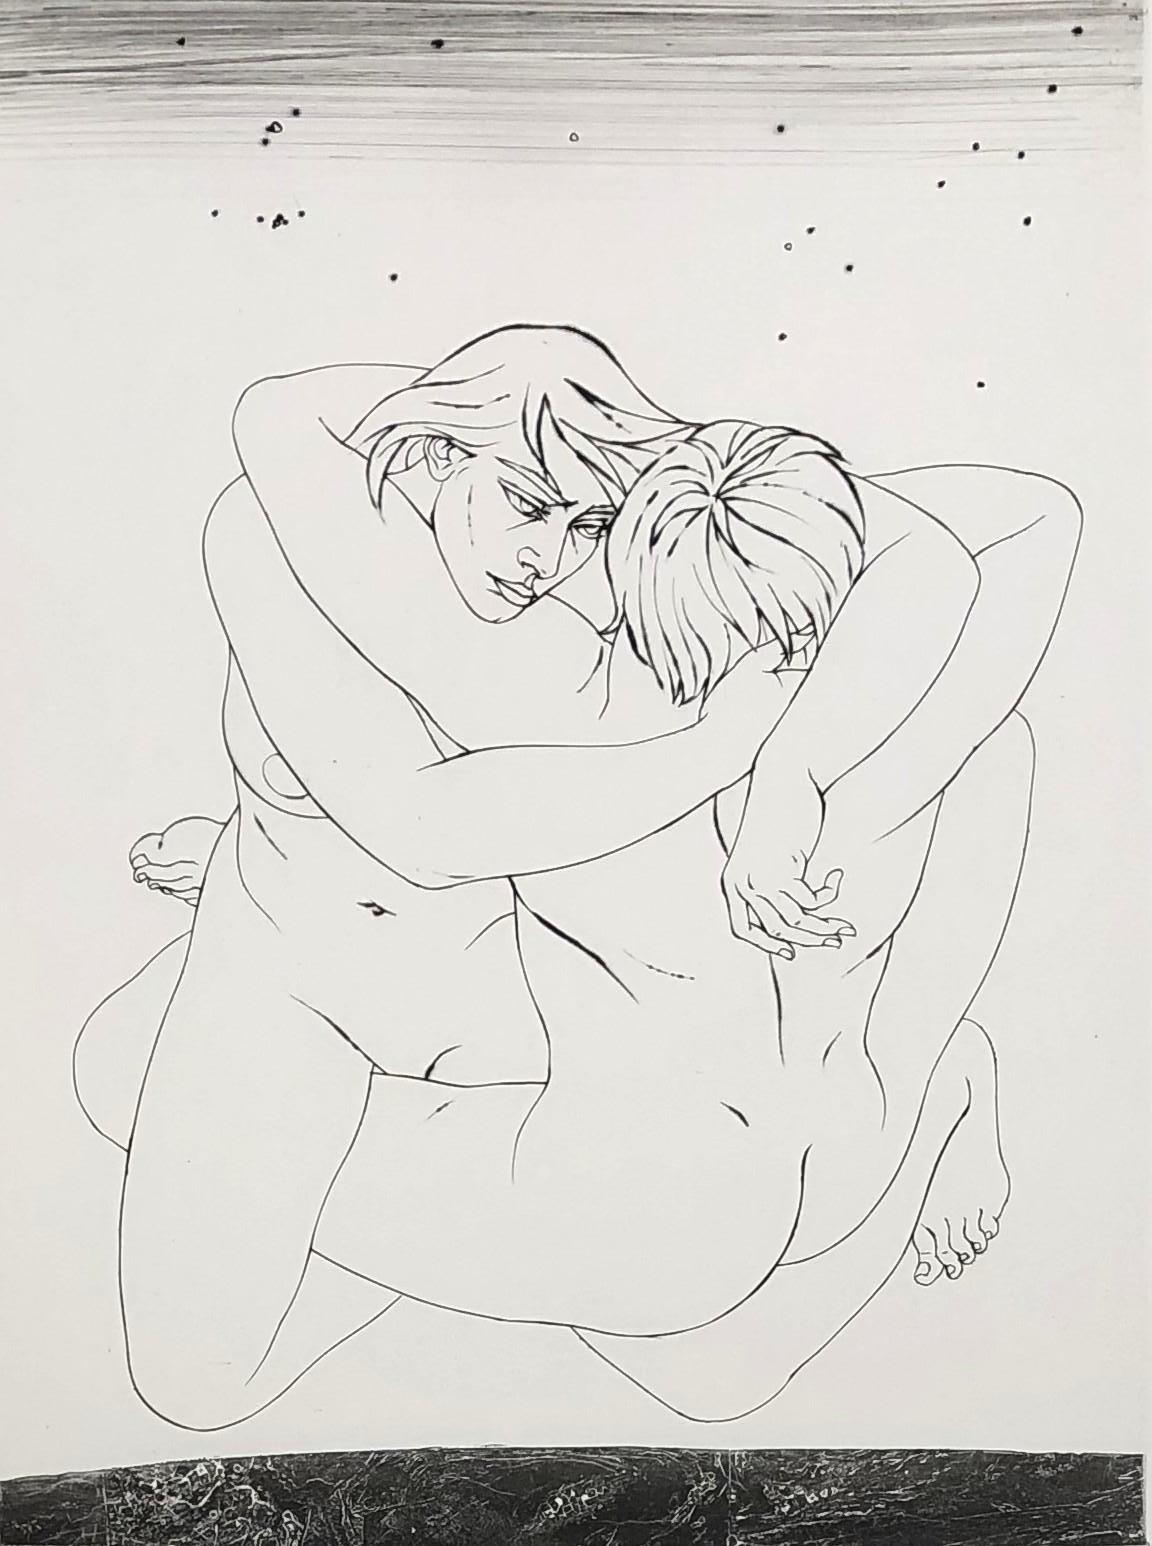 Couple Embraced - Original etching handsigned and numbered - Print by Pierre-Yves Trémois